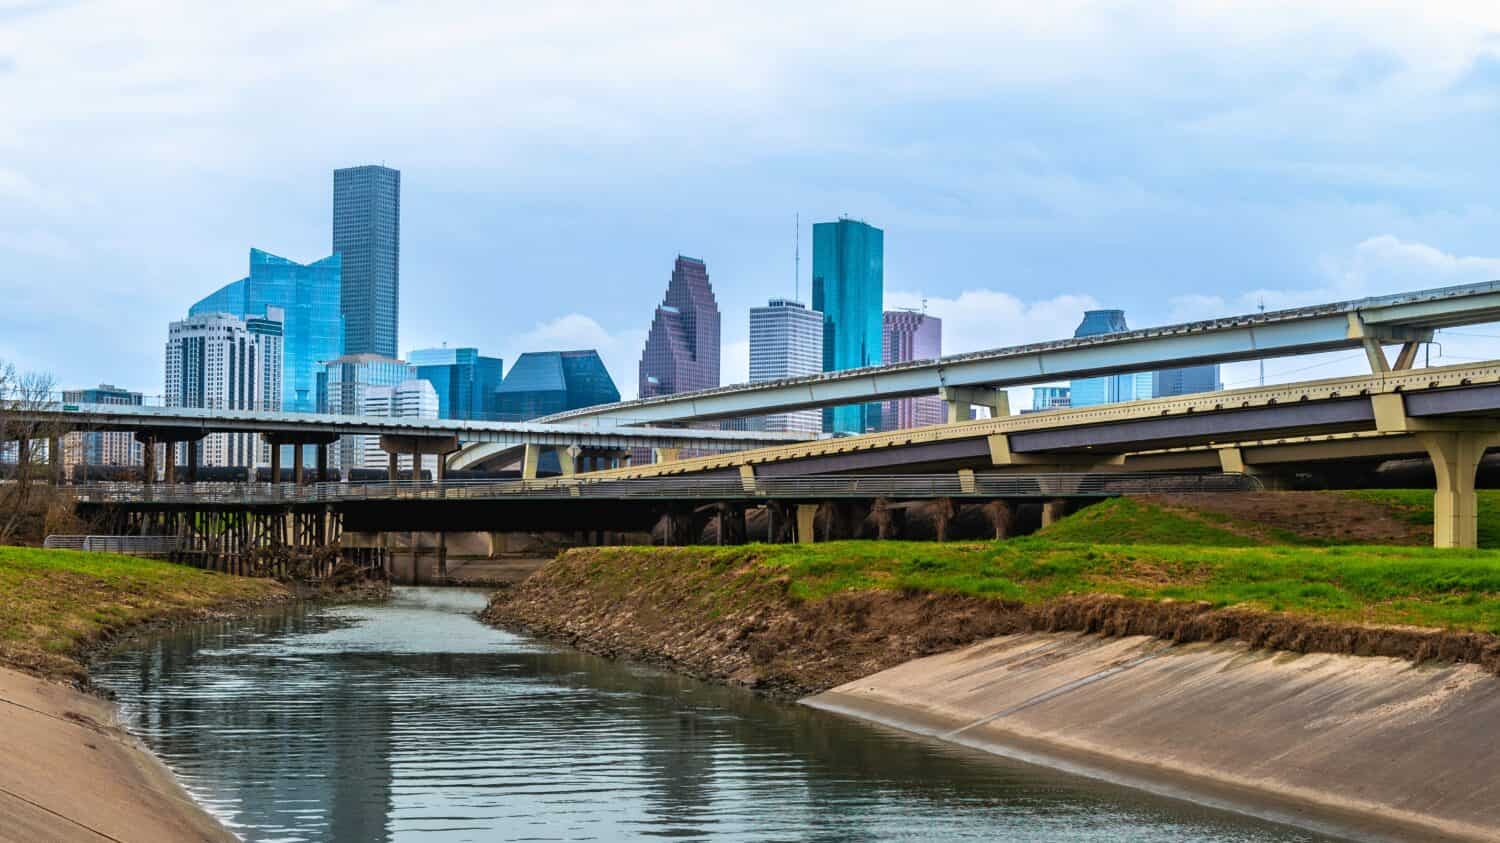 Houston Downtown City Skyline and water reflections along the White Oak Bayou Greenway under Interstate 45 Freeway in Texas, USA